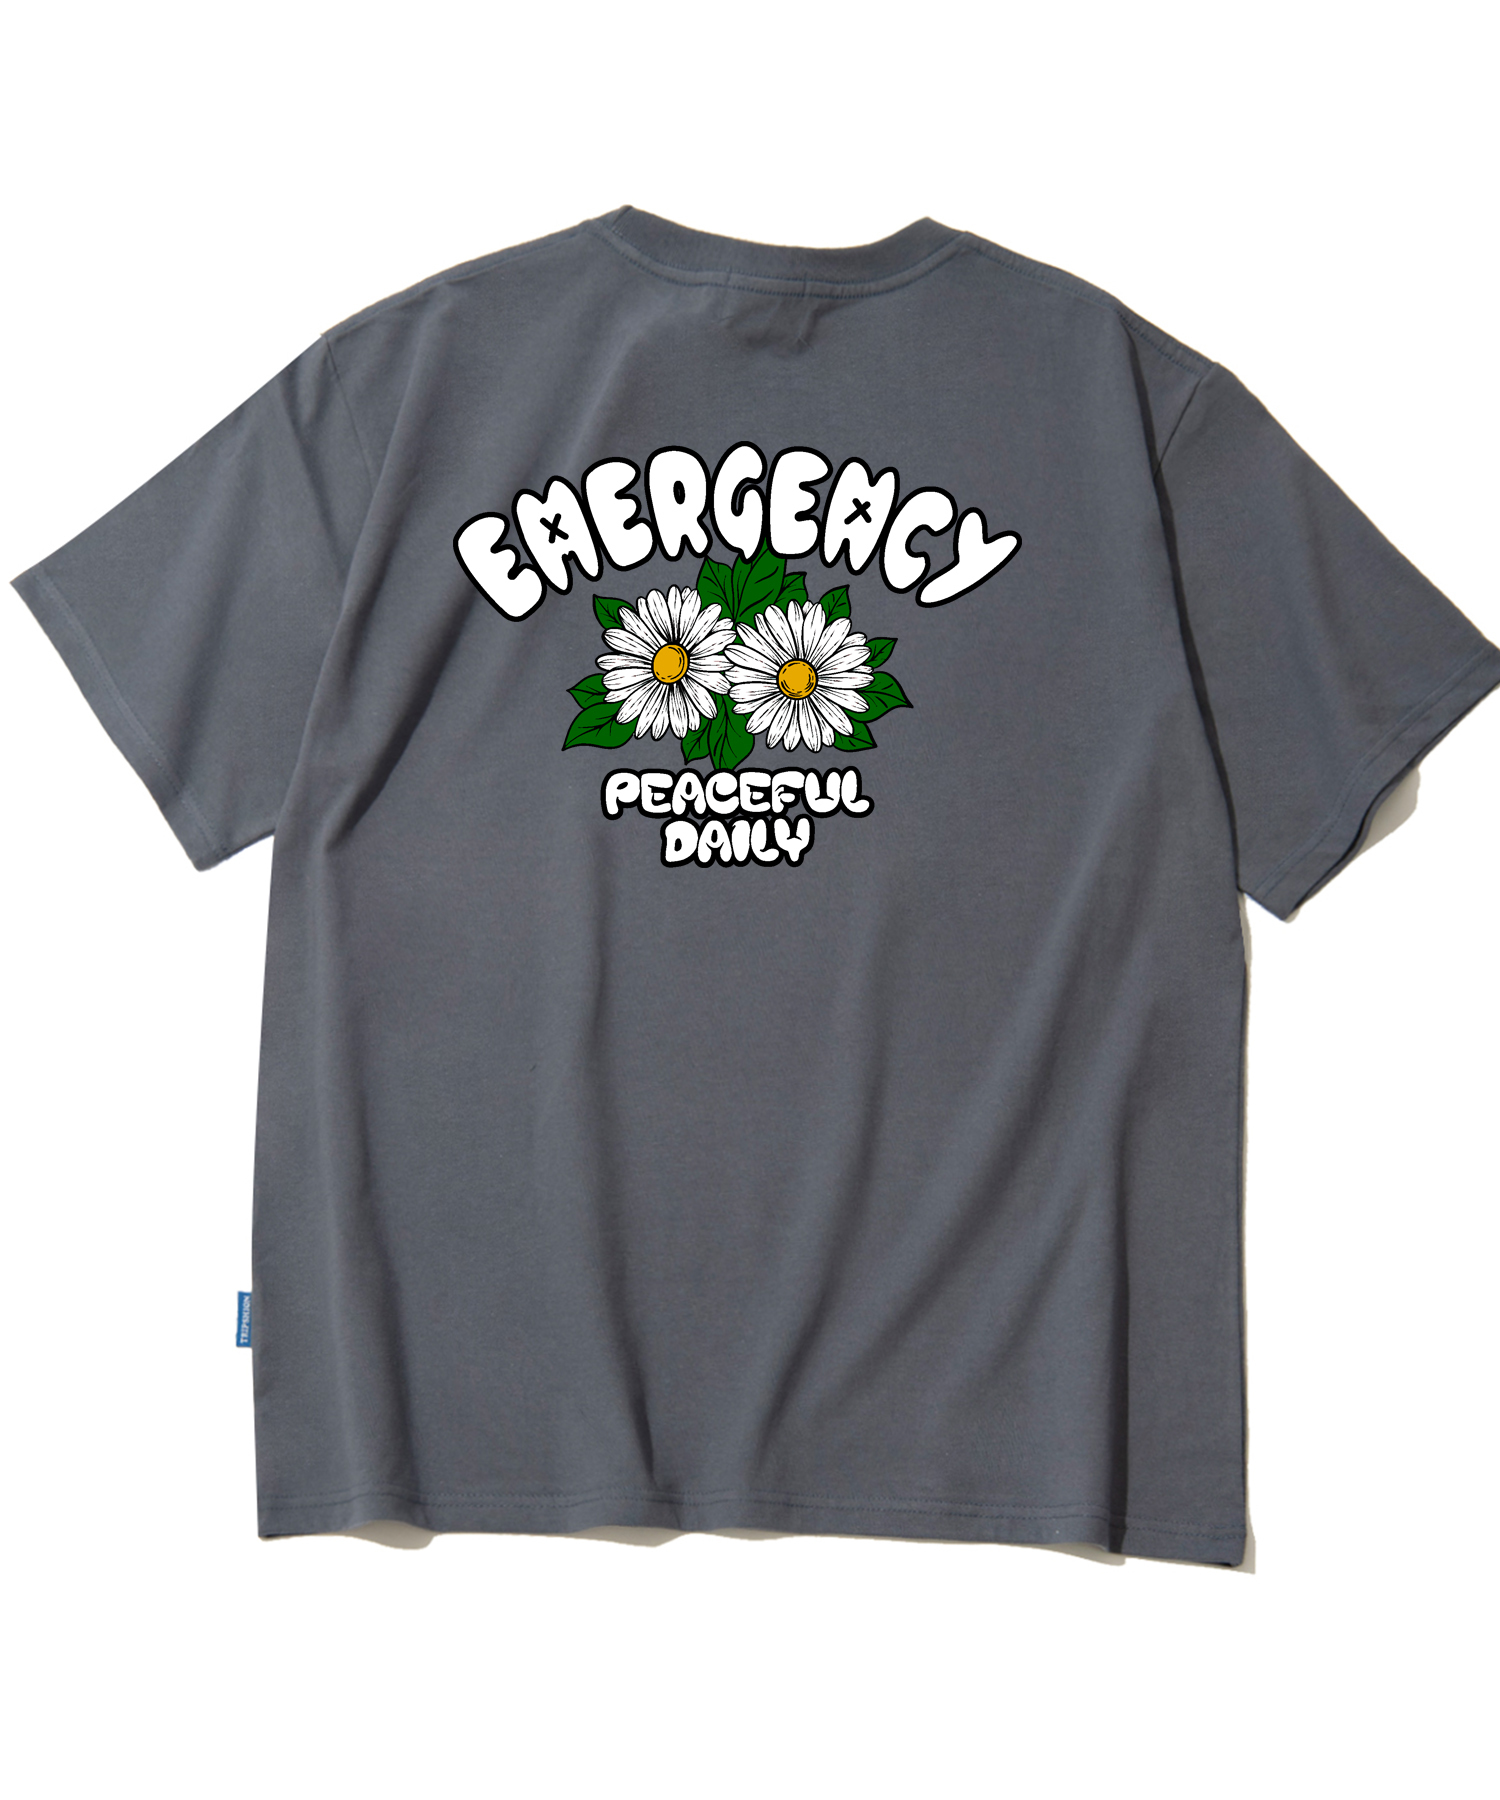 DOUBLE DAISY FLOWER GRAPHIC T-SHIRTS - GRAY